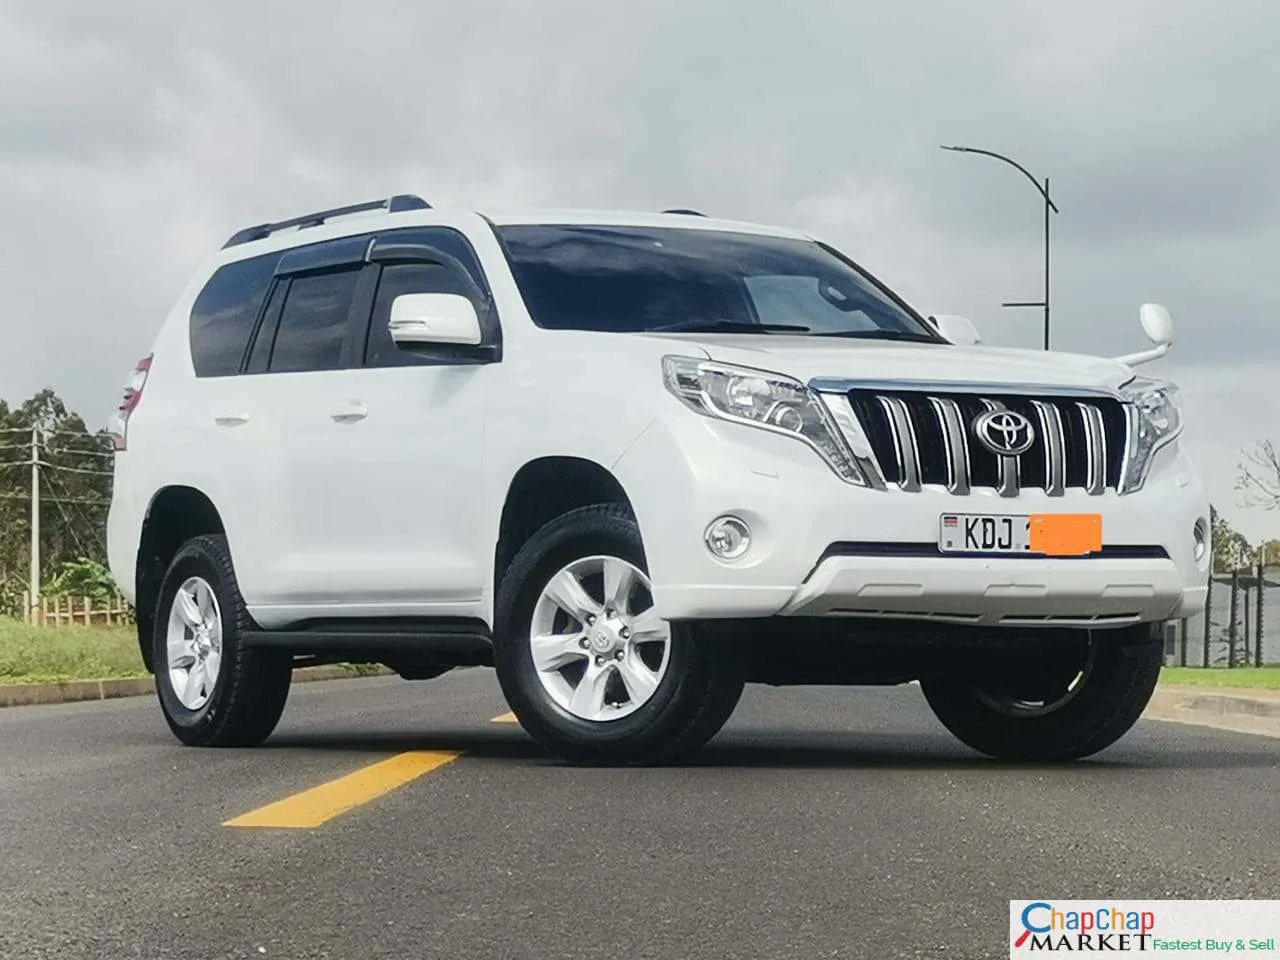 Toyota Prado J150 QUICK SALE 🔥You Pay 40% Deposit Trade in OK EXCLUSIVE Toyota Prado 150 for sale in kenya hire purchase installments